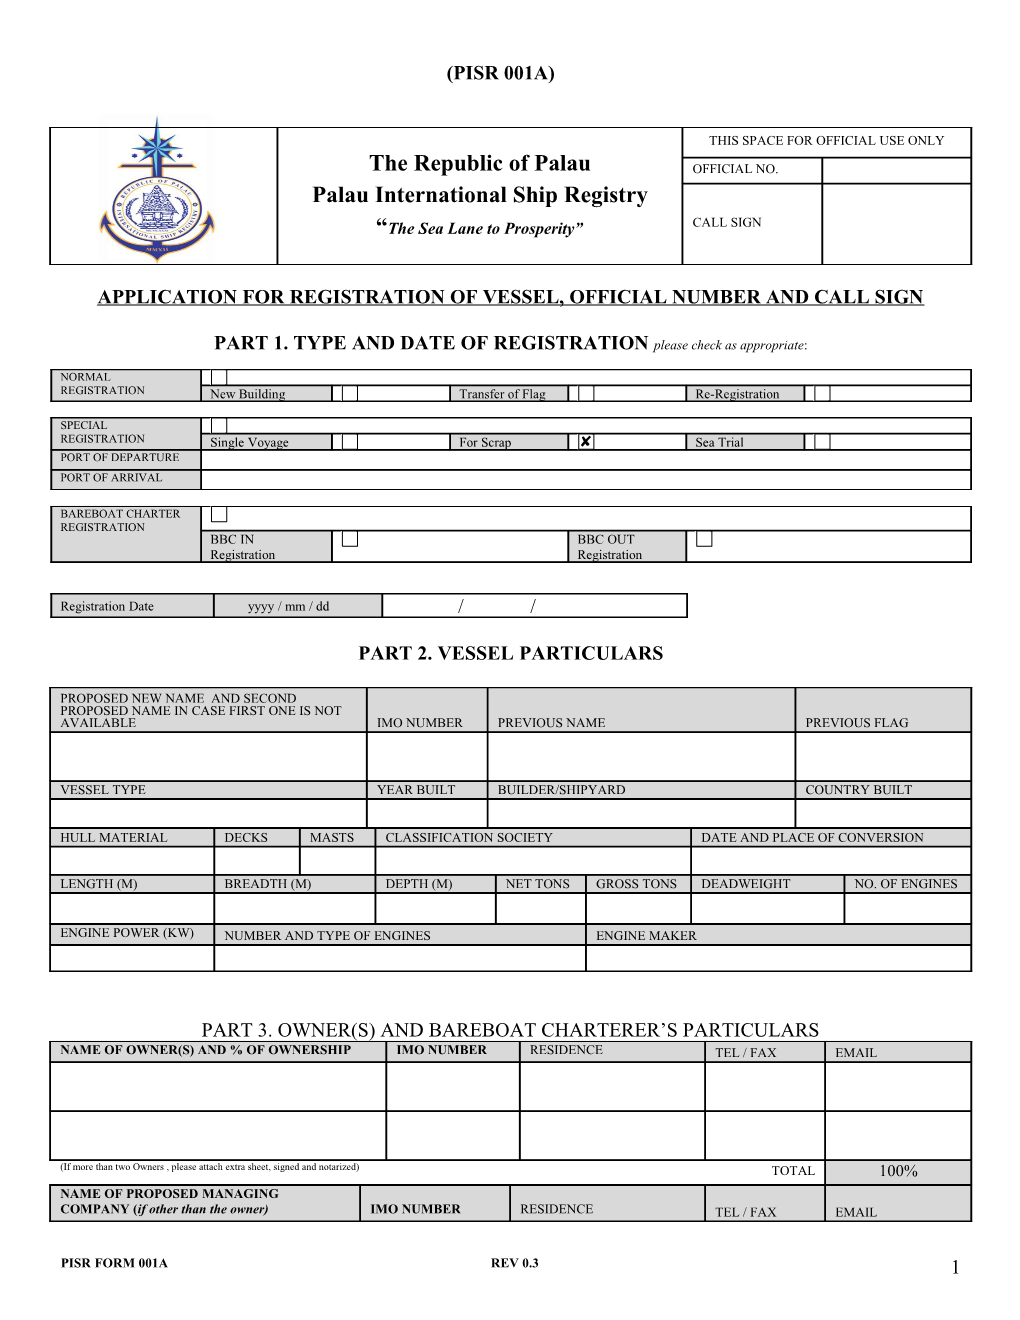 Application for Registration of Vessel, Official Number and Call Sign